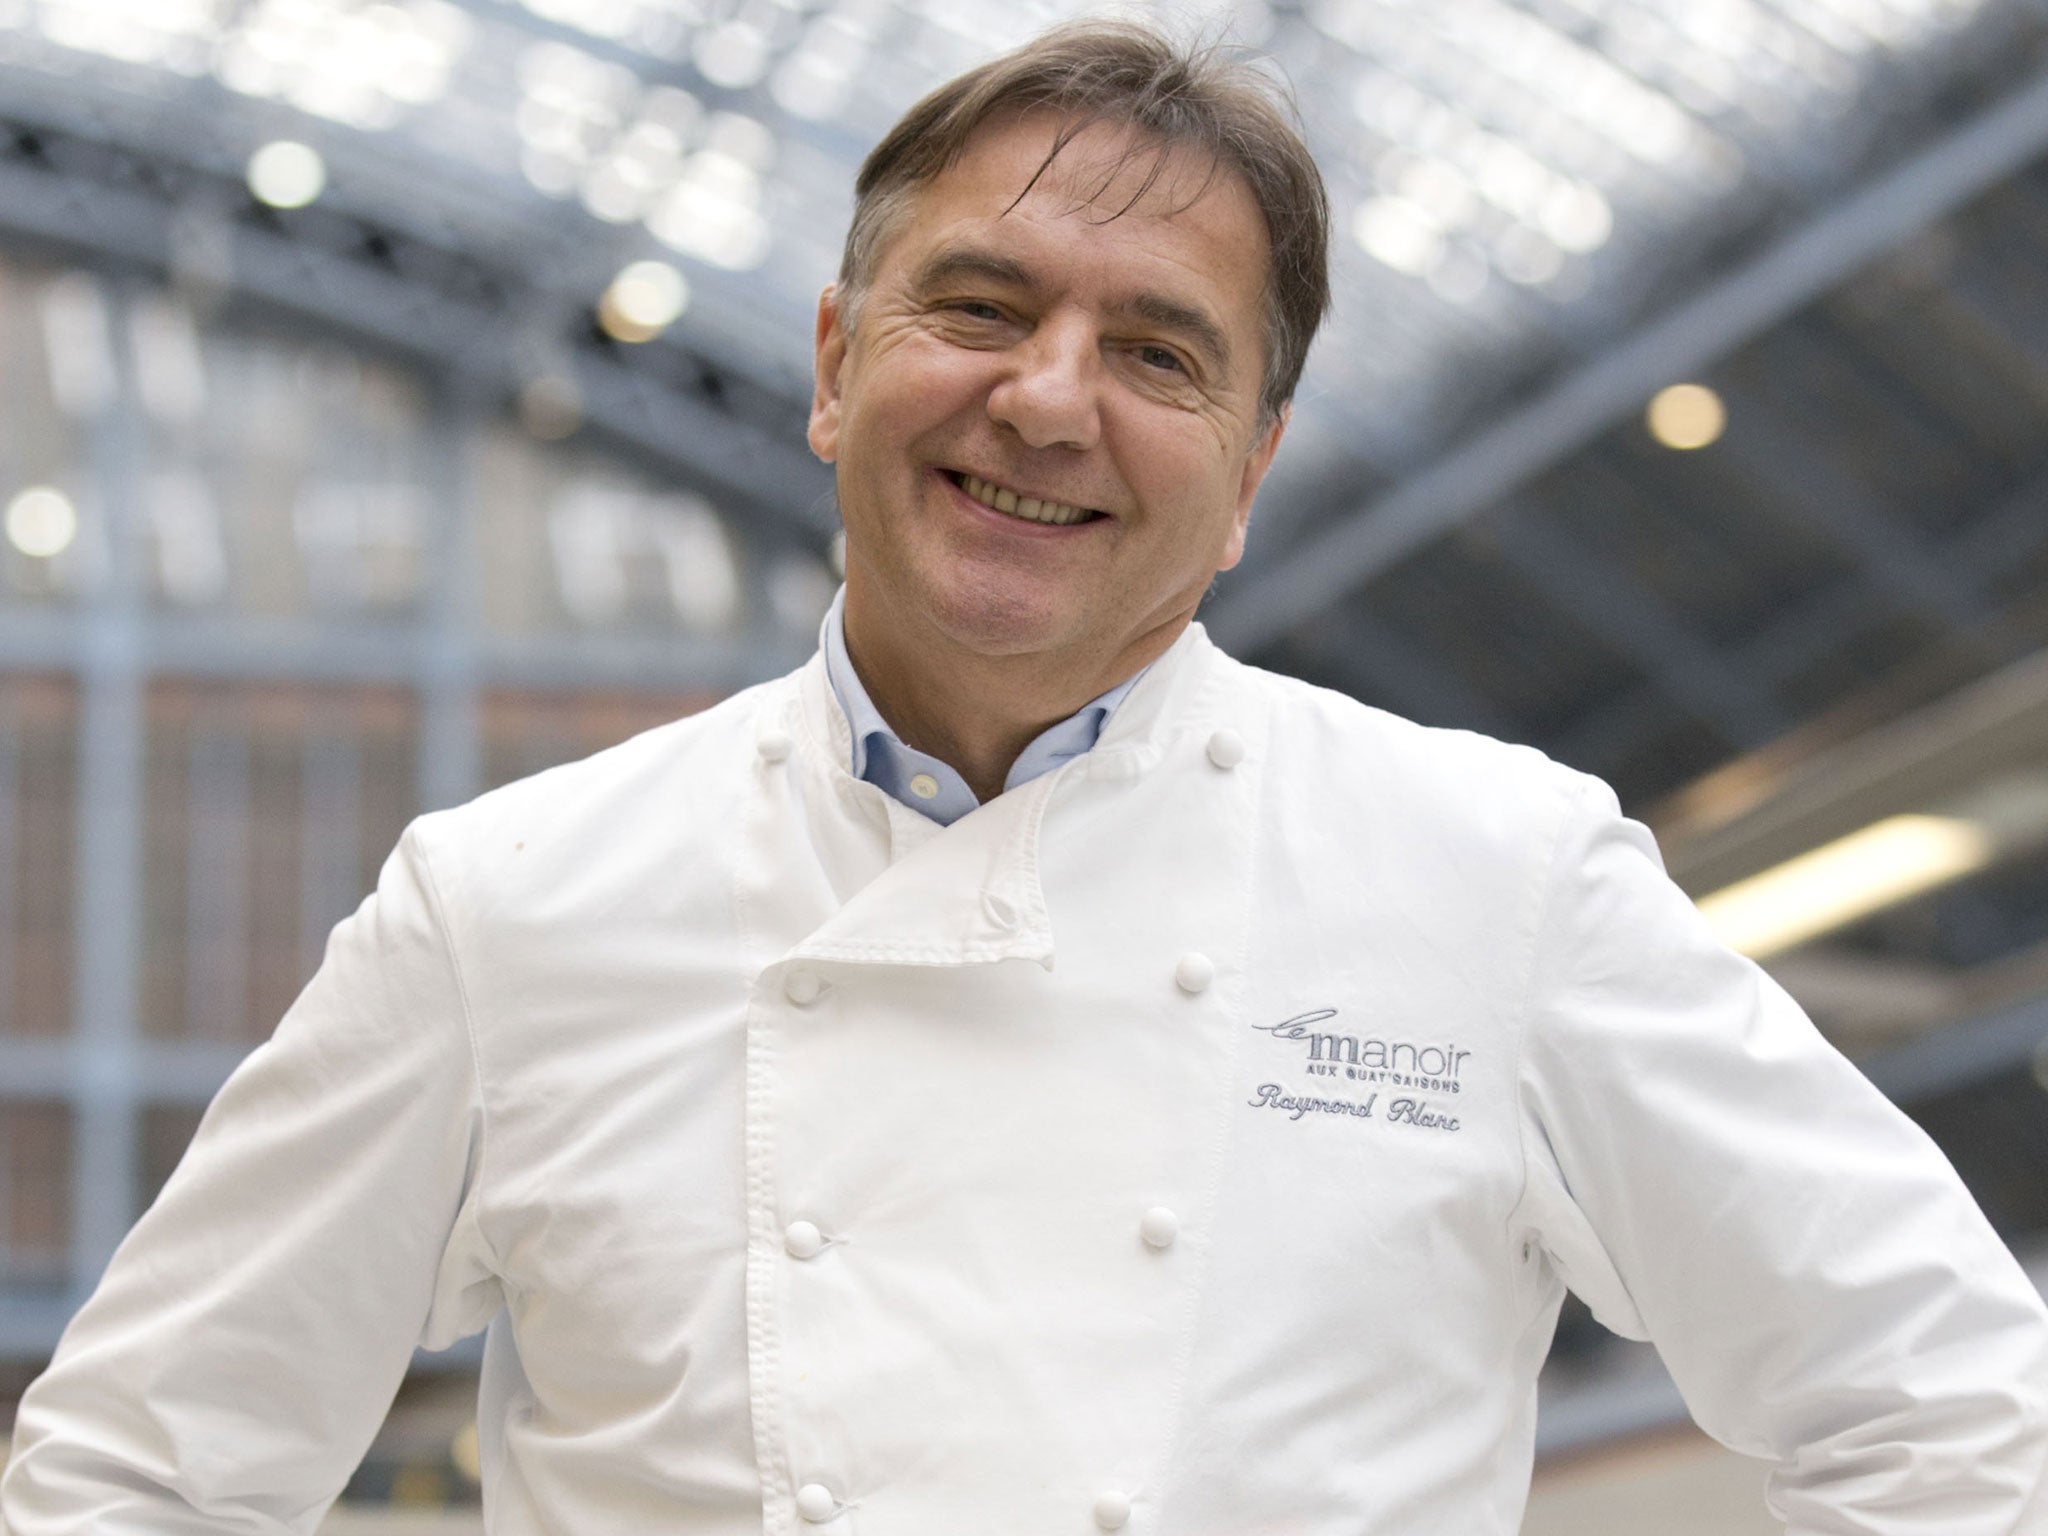 Raymond Blanc: 'People have lost completely their connection with the earth, their sense of place, how food is grown, the variety and seasonality'